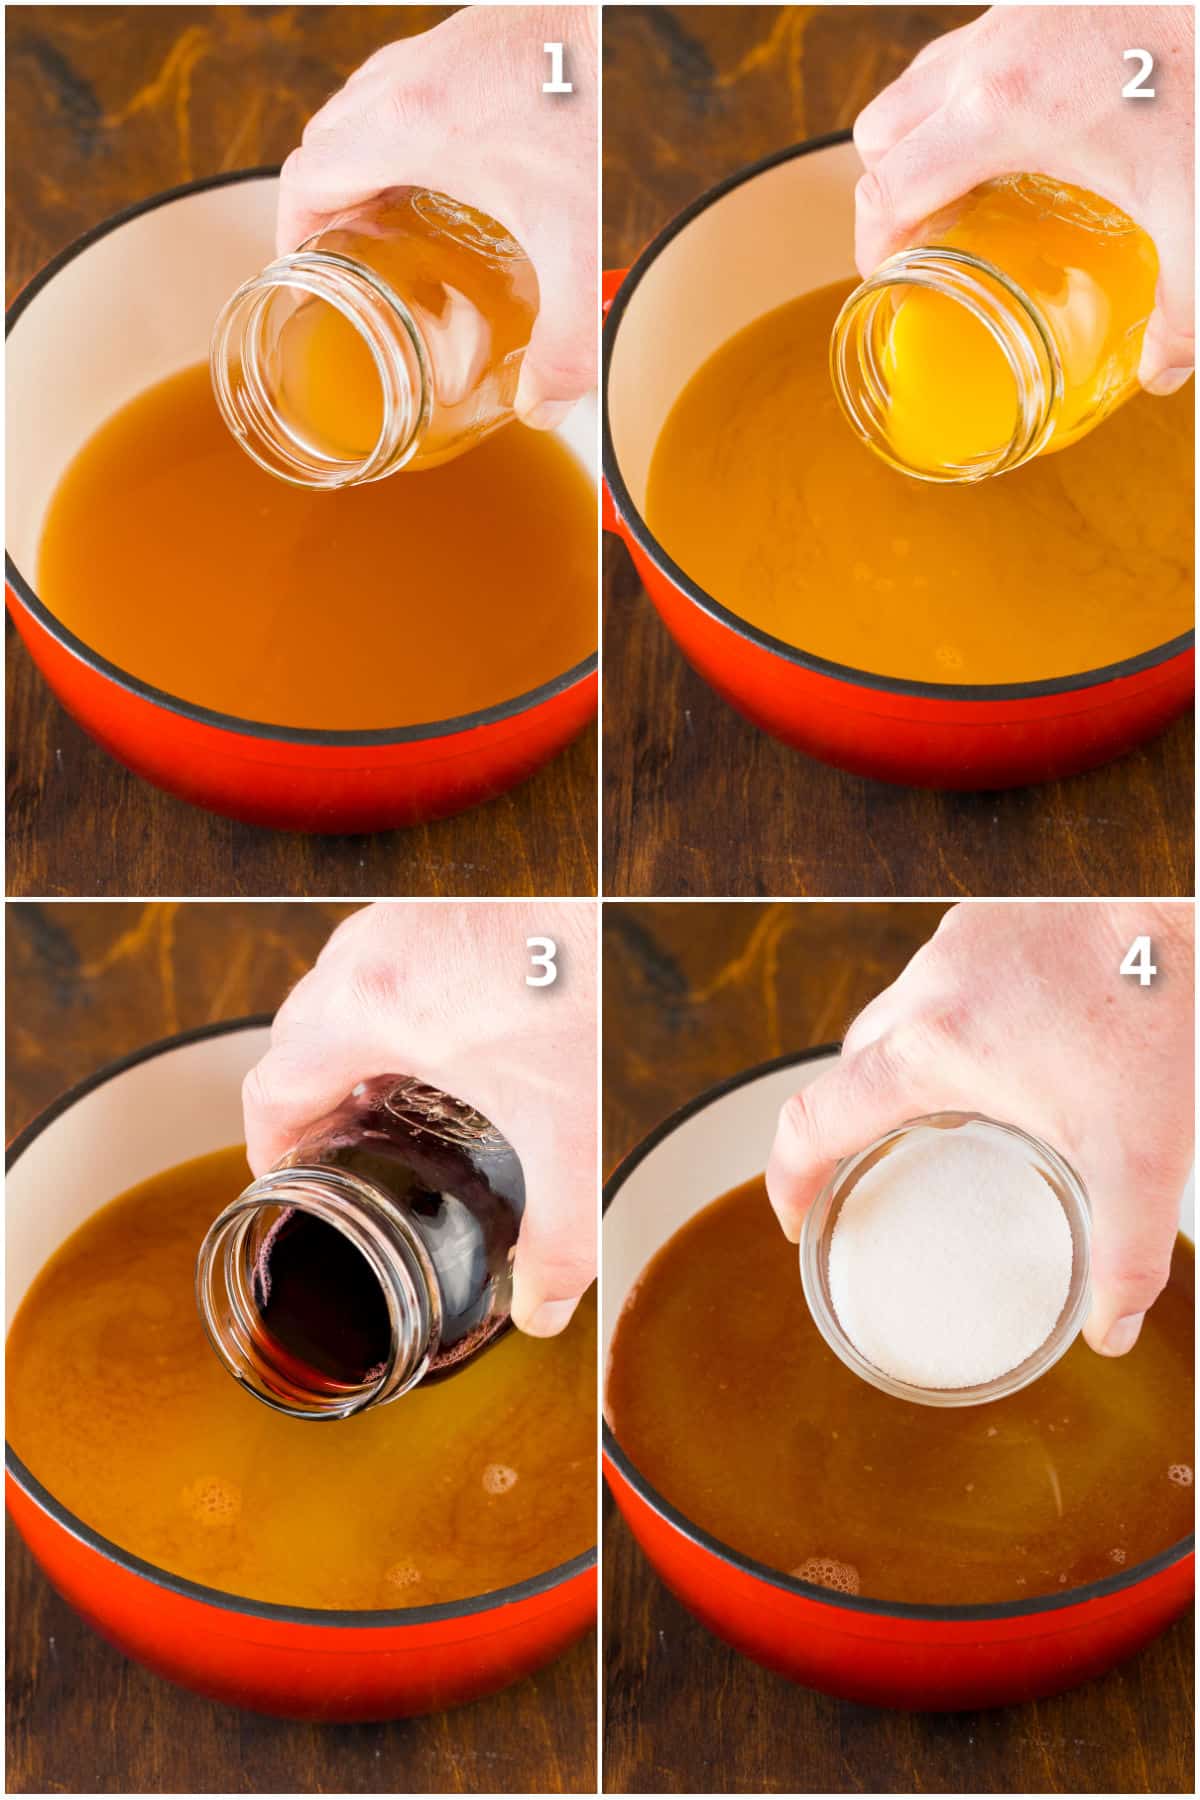 Juices and sugar being poured into a pot.